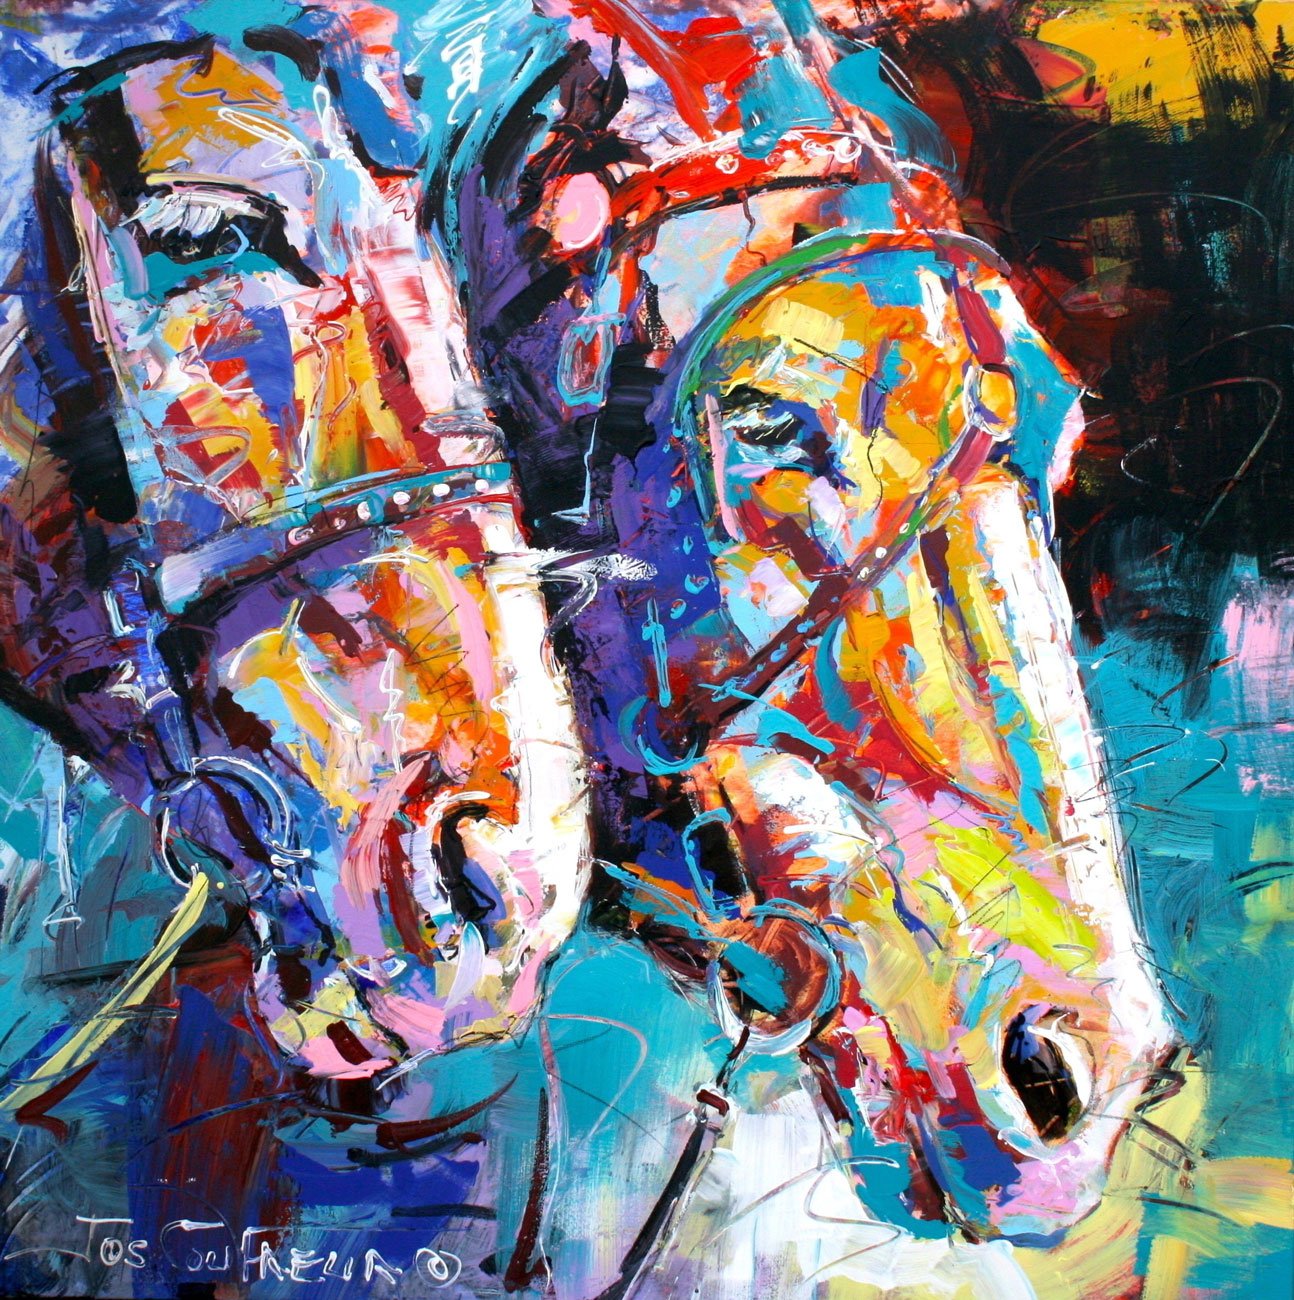 Draught Horses by Jos Coufreur. Horse art on Bluethumb.